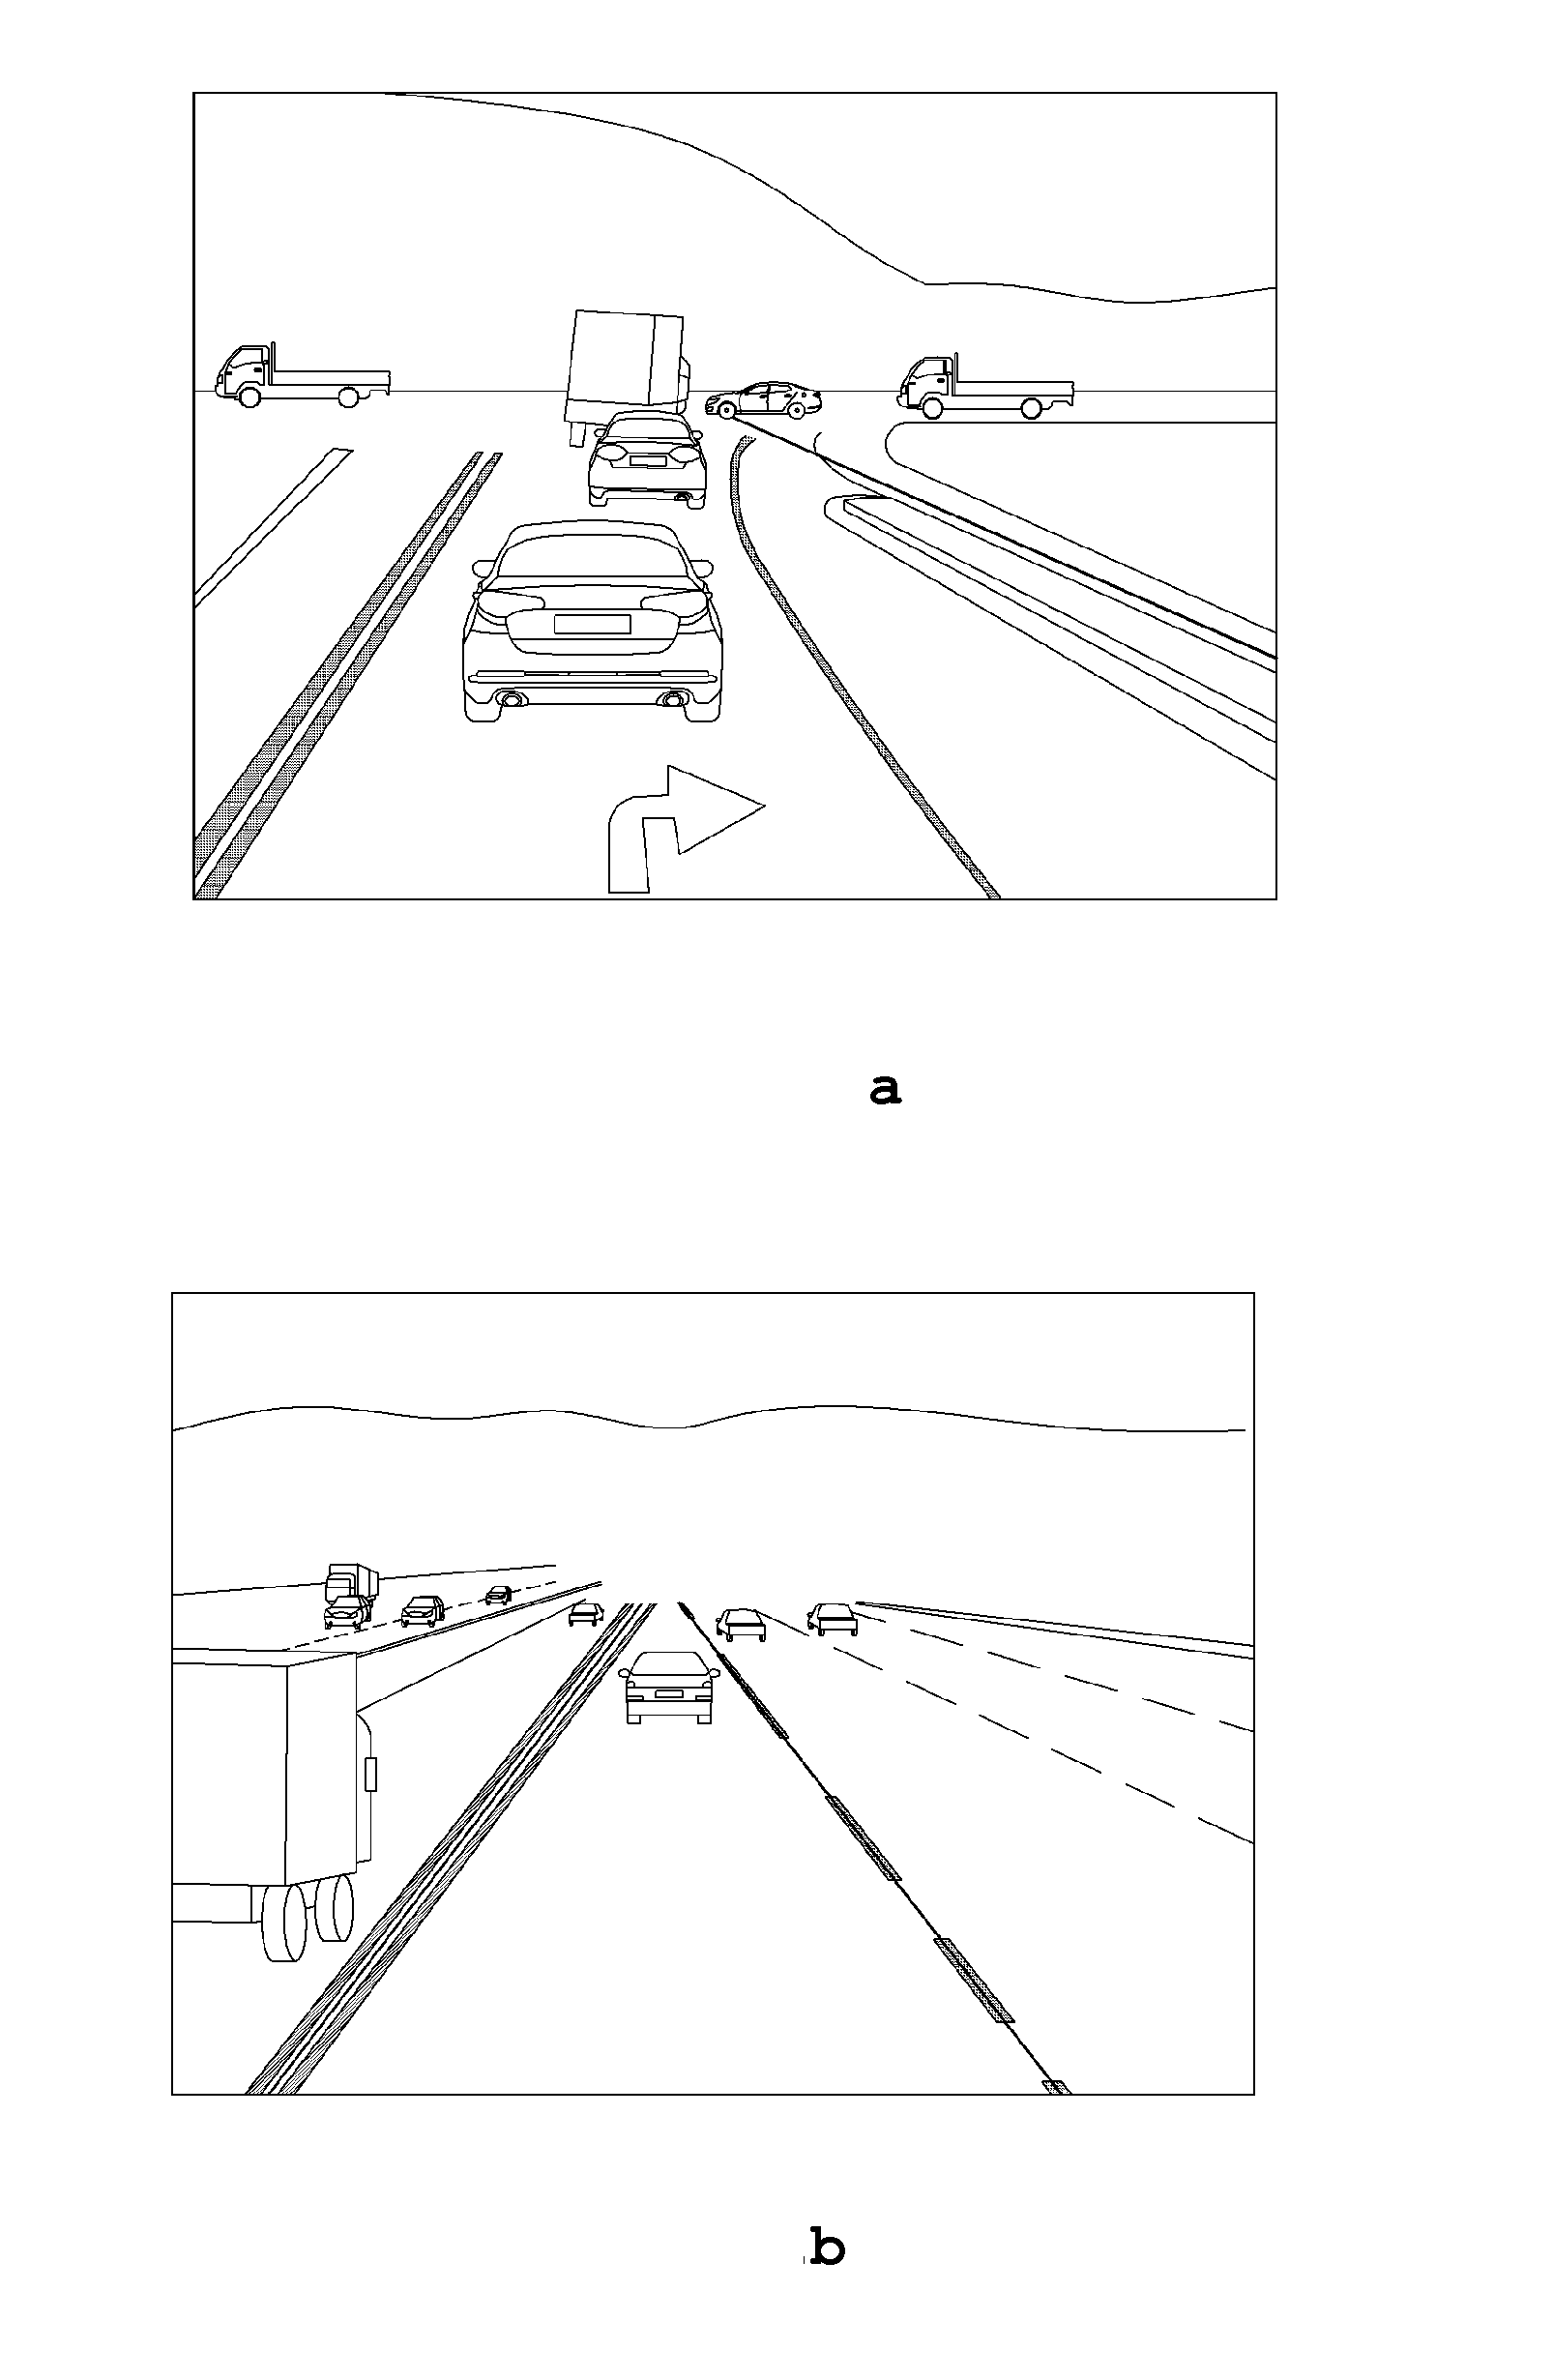 Route change determination system and method using image recognition information